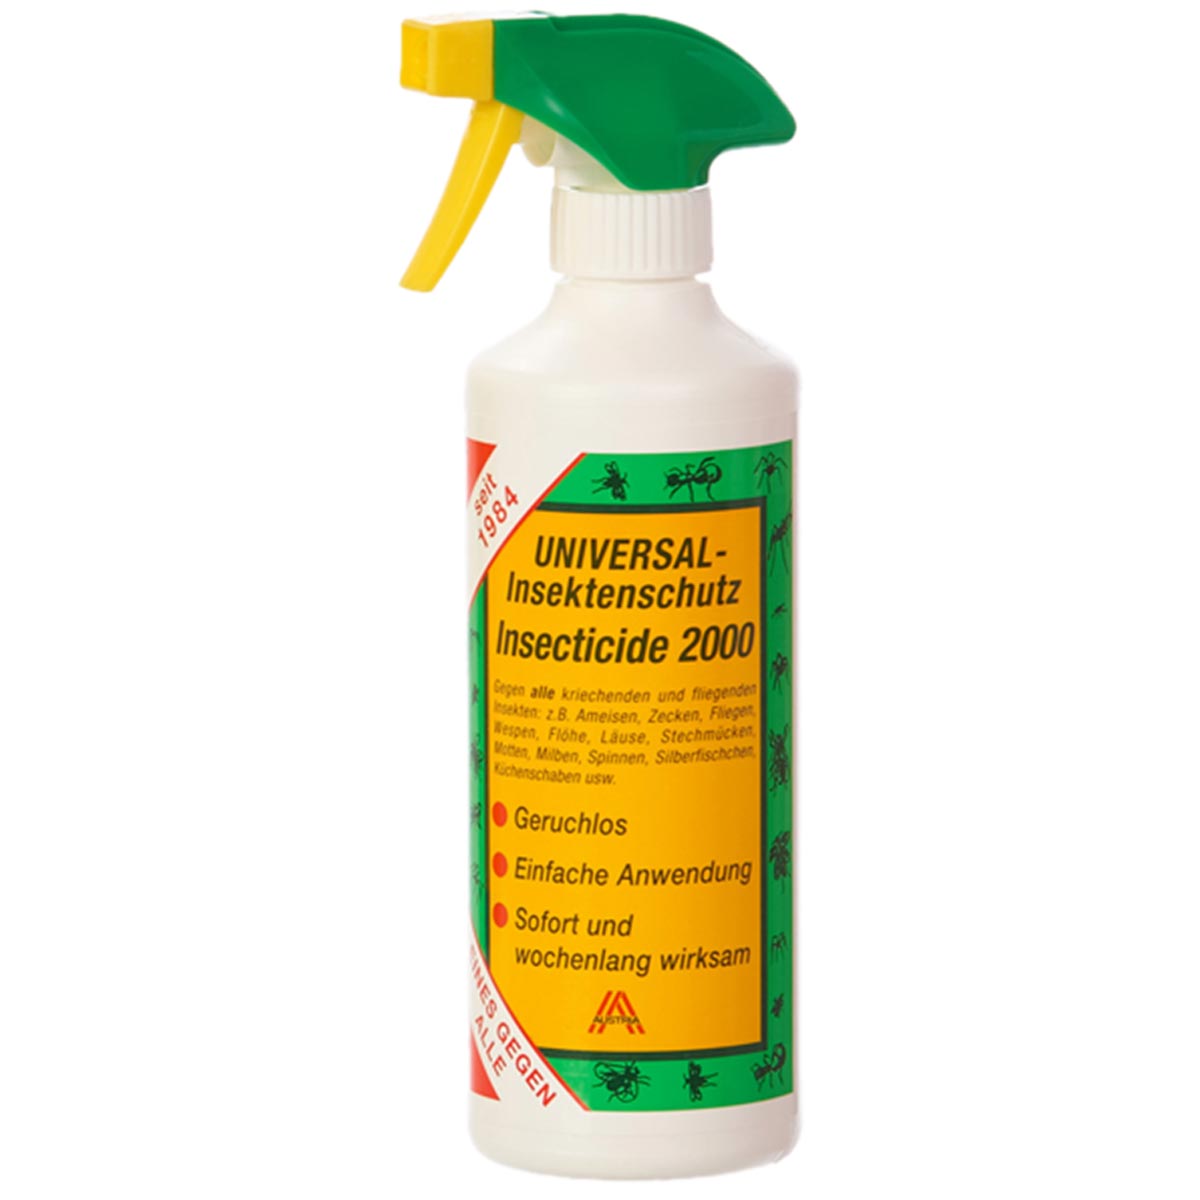 Insecticide 2000 Ecran insecticid universal 500 ml